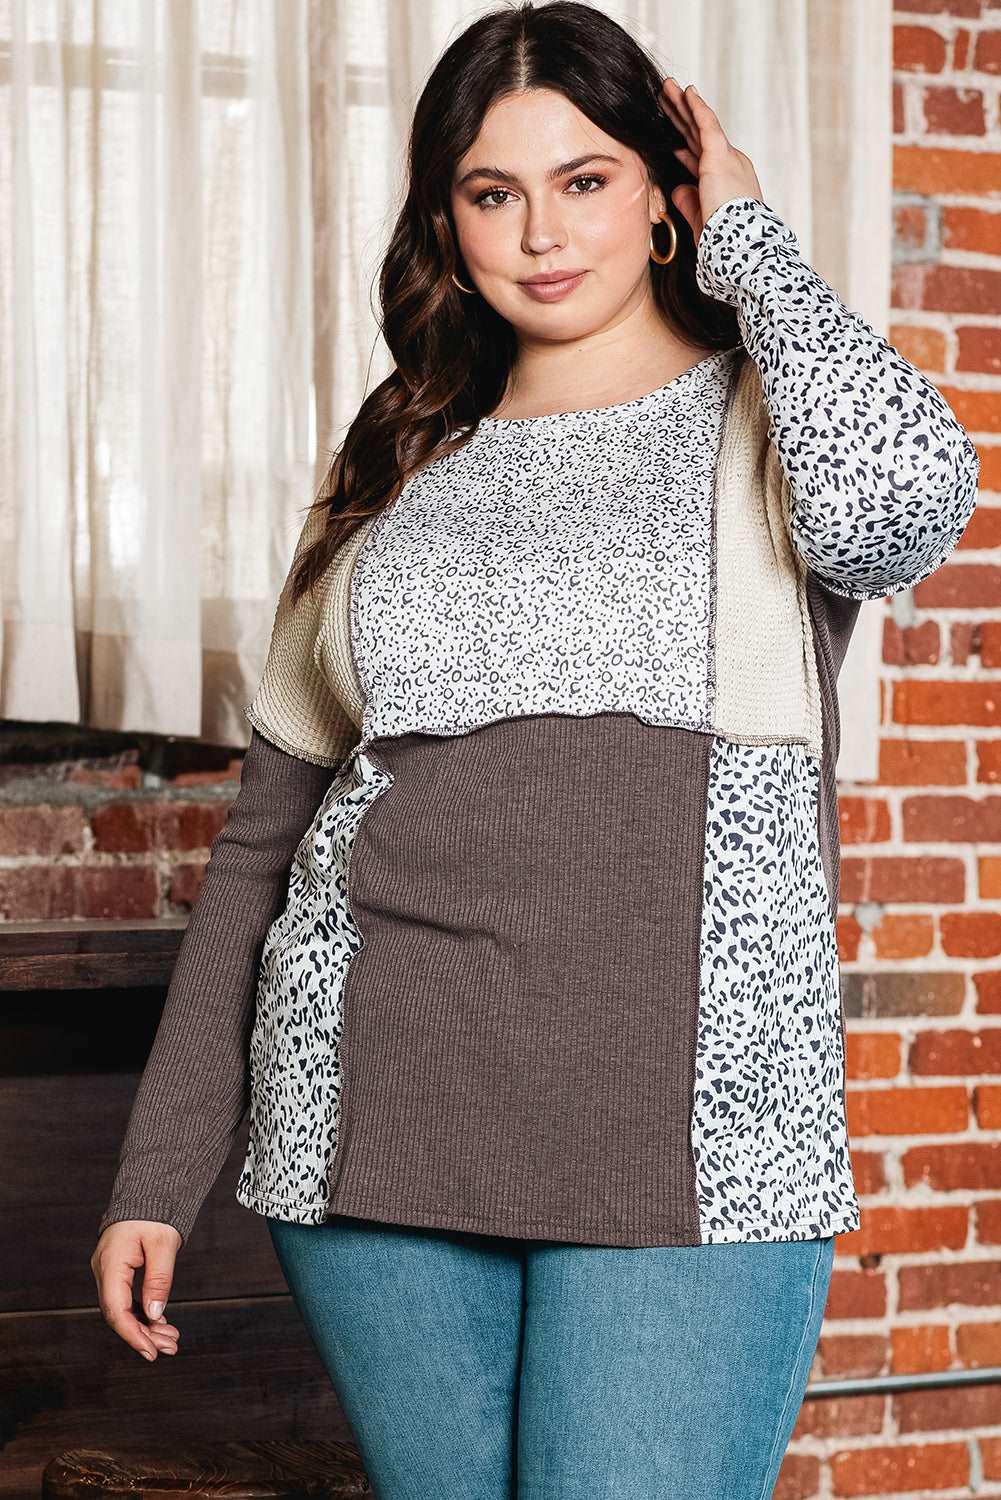 Cocoa Feline Waffle Patchwork Plus Size Top